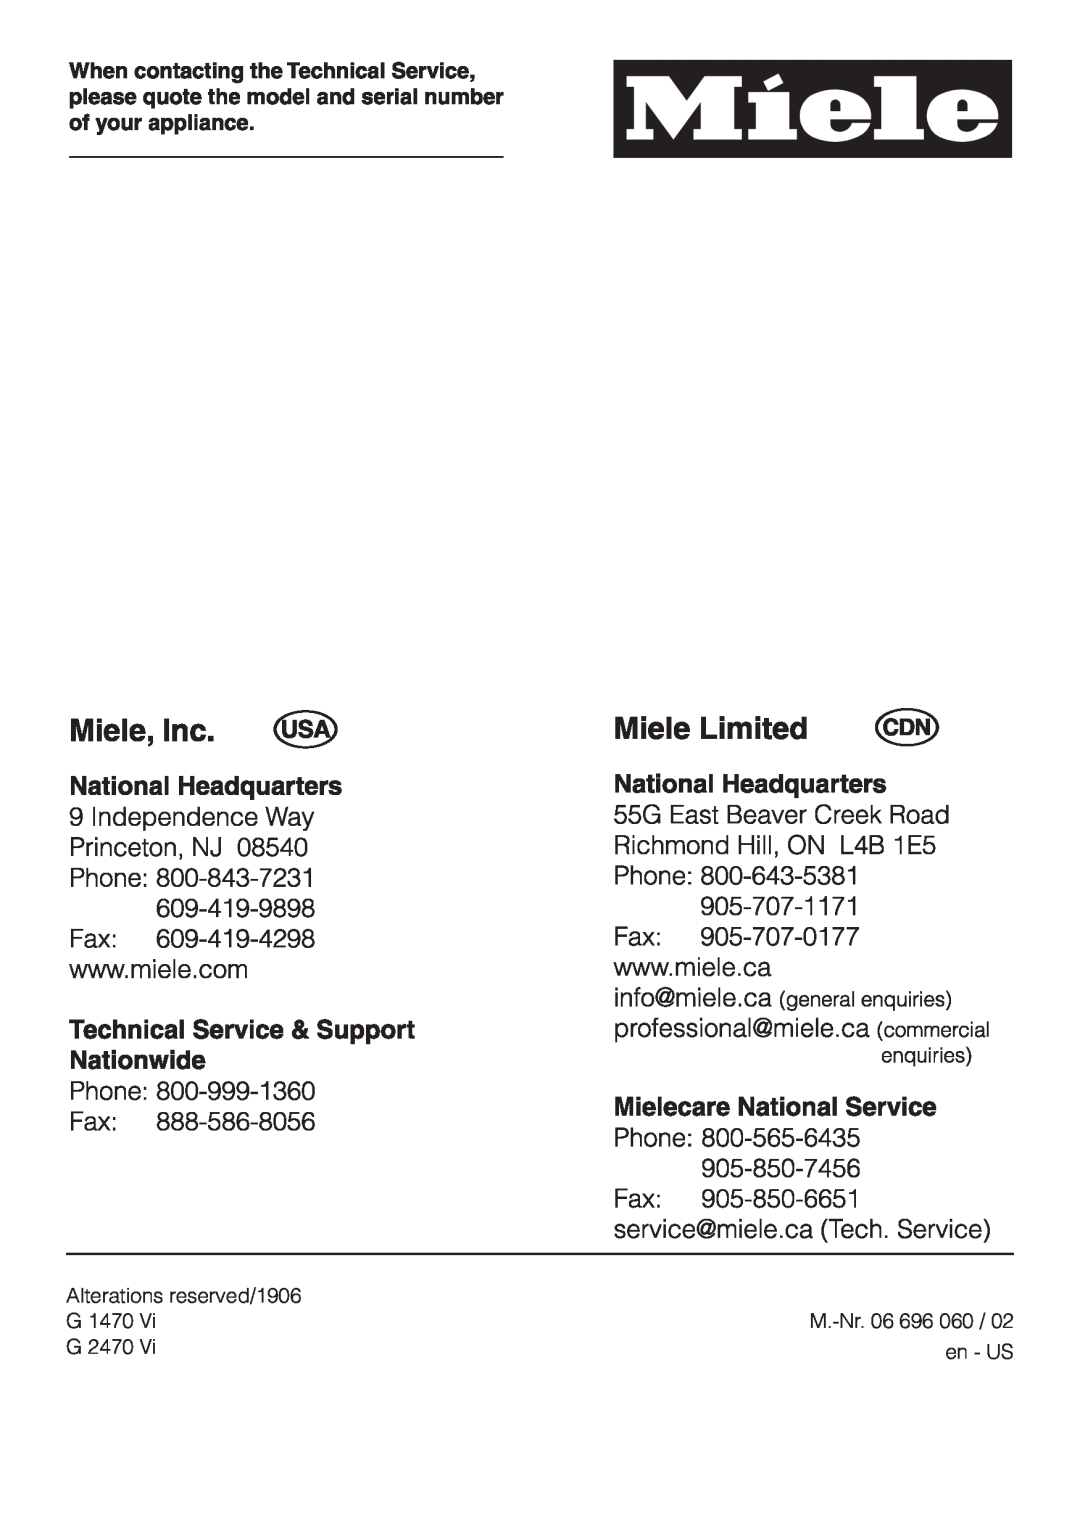 Miele G2470, G1470 operating instructions Alterations reserved/1906, G 1470, G 2470, en - US, M.-Nr.06 696 060 